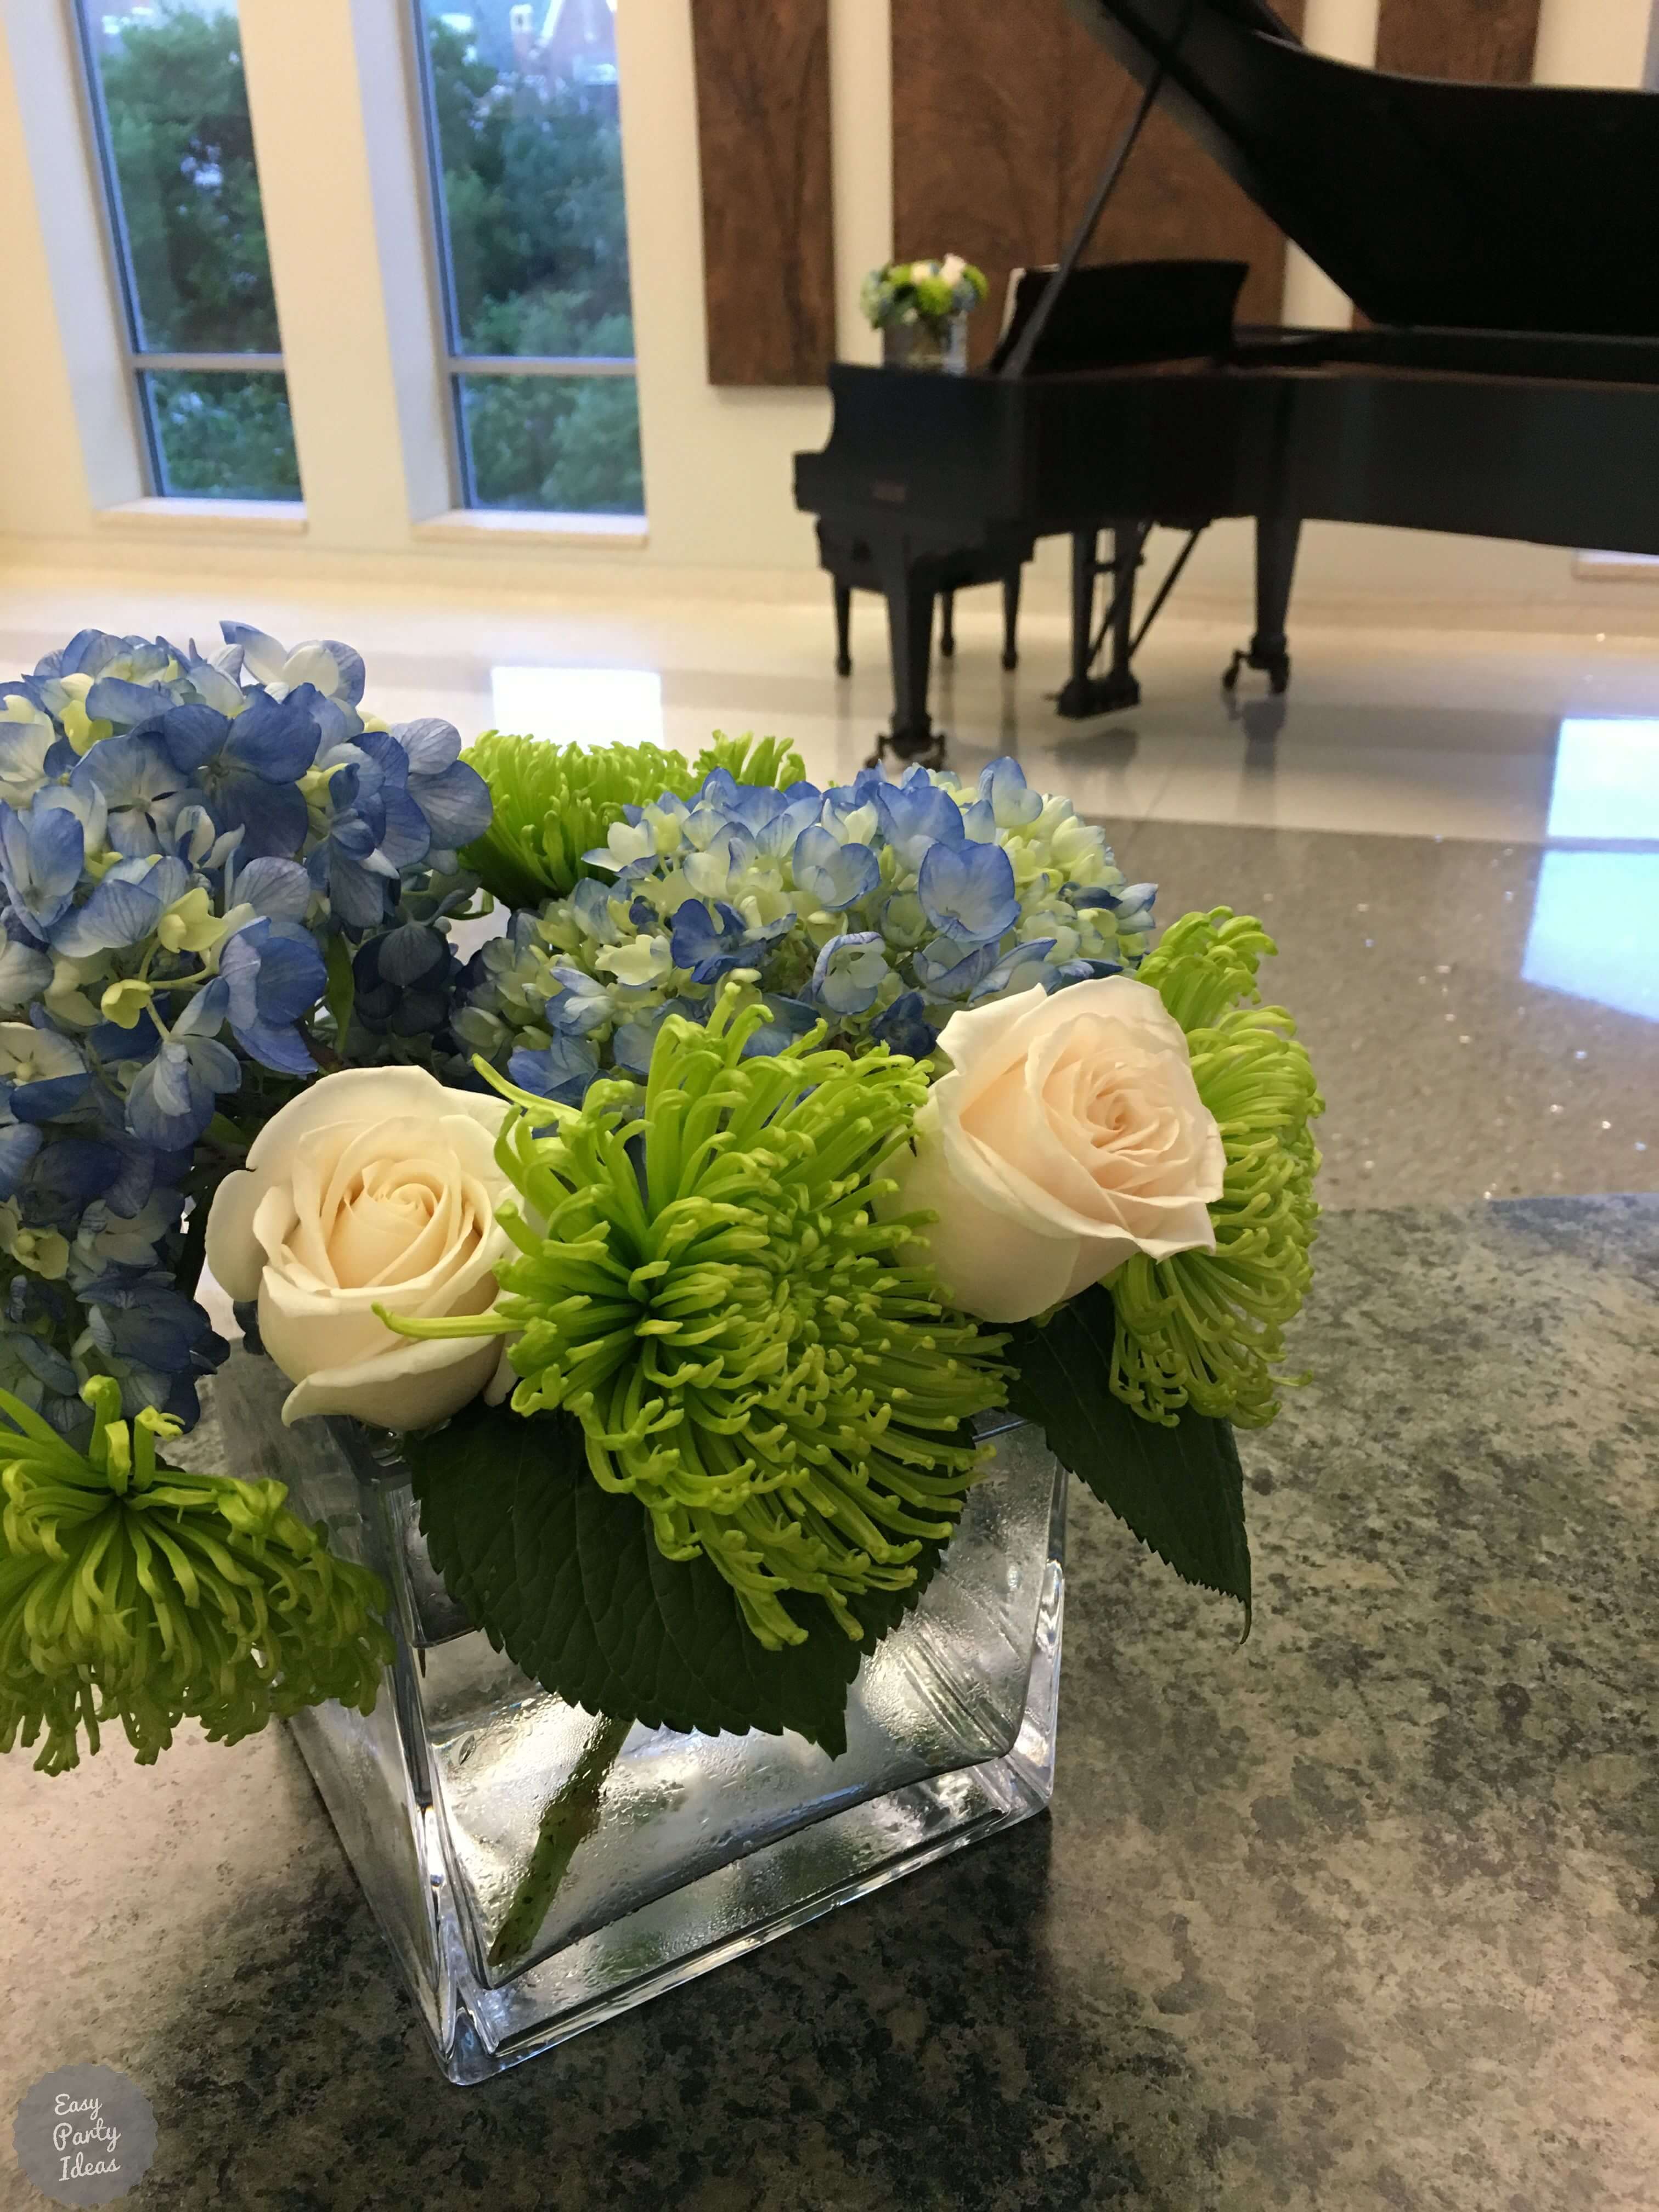 Blue Hydrangea, White Rose and Green Flowers